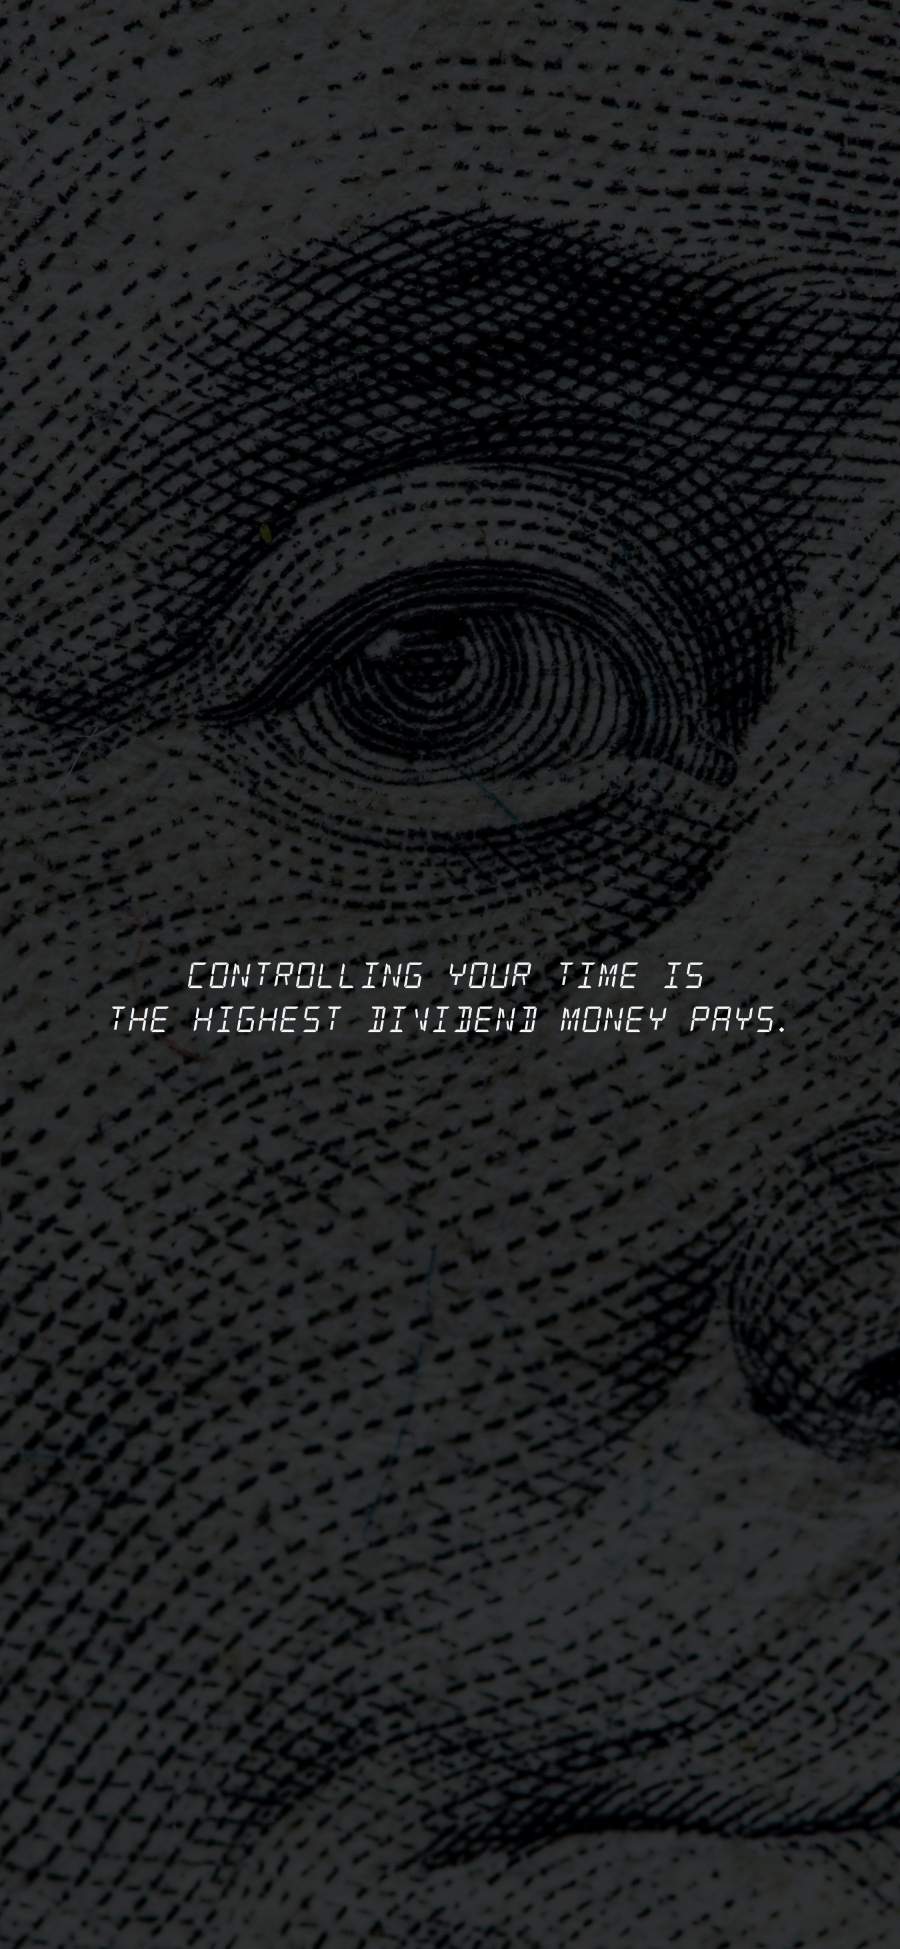 Time Is Money Iphone Wallpaper Iphone Wallpapers Iphone Wallpapers